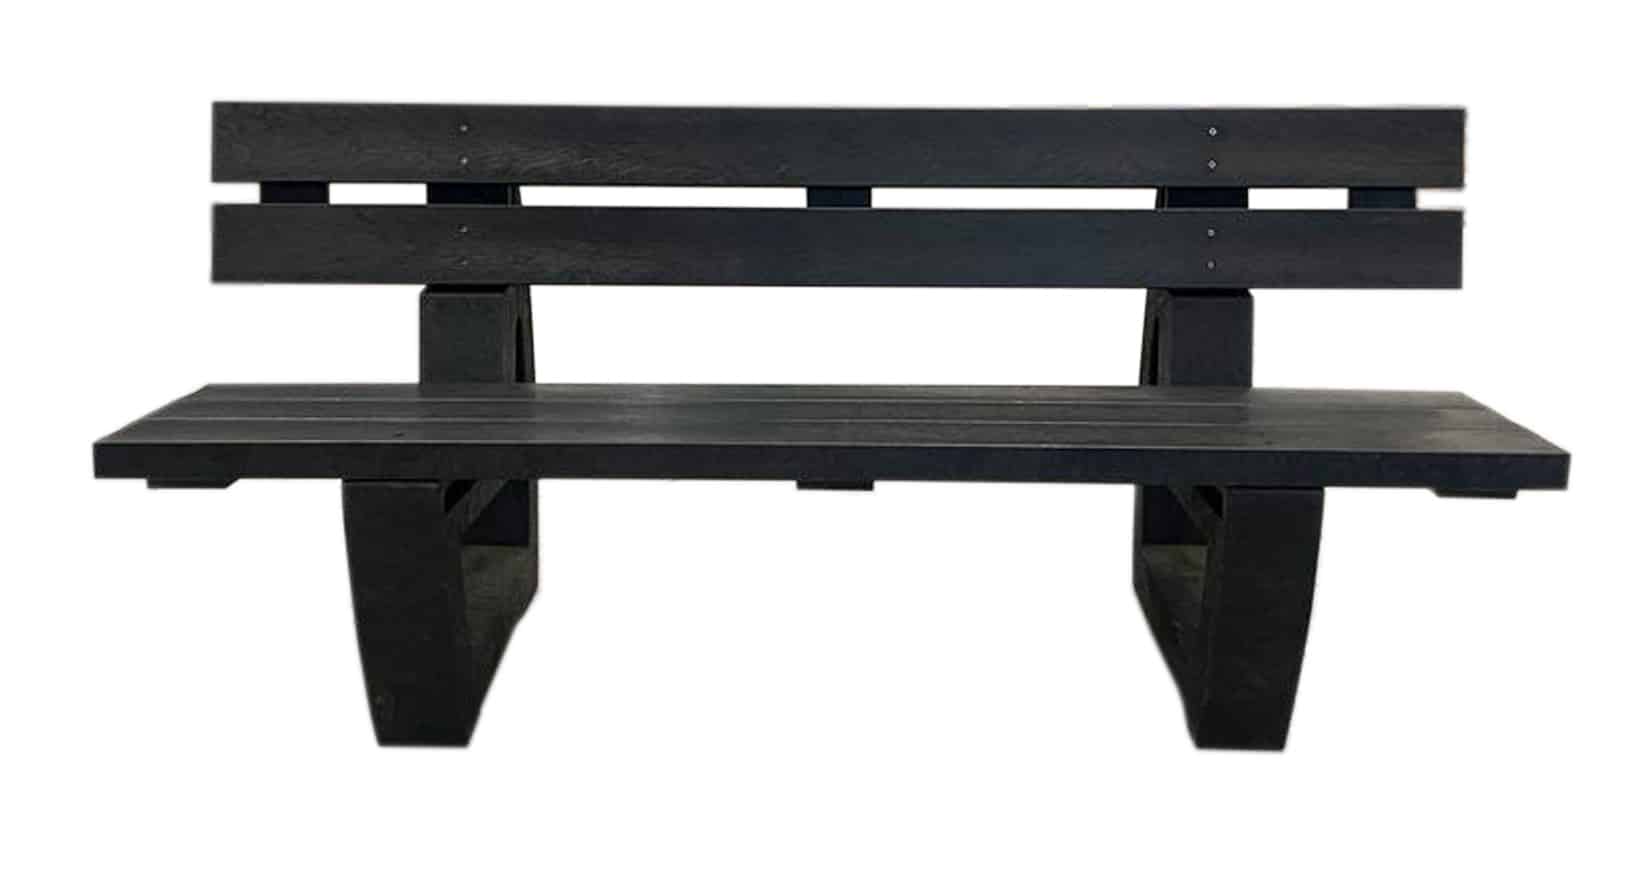 The best-selling Harewood recycled plastic bench